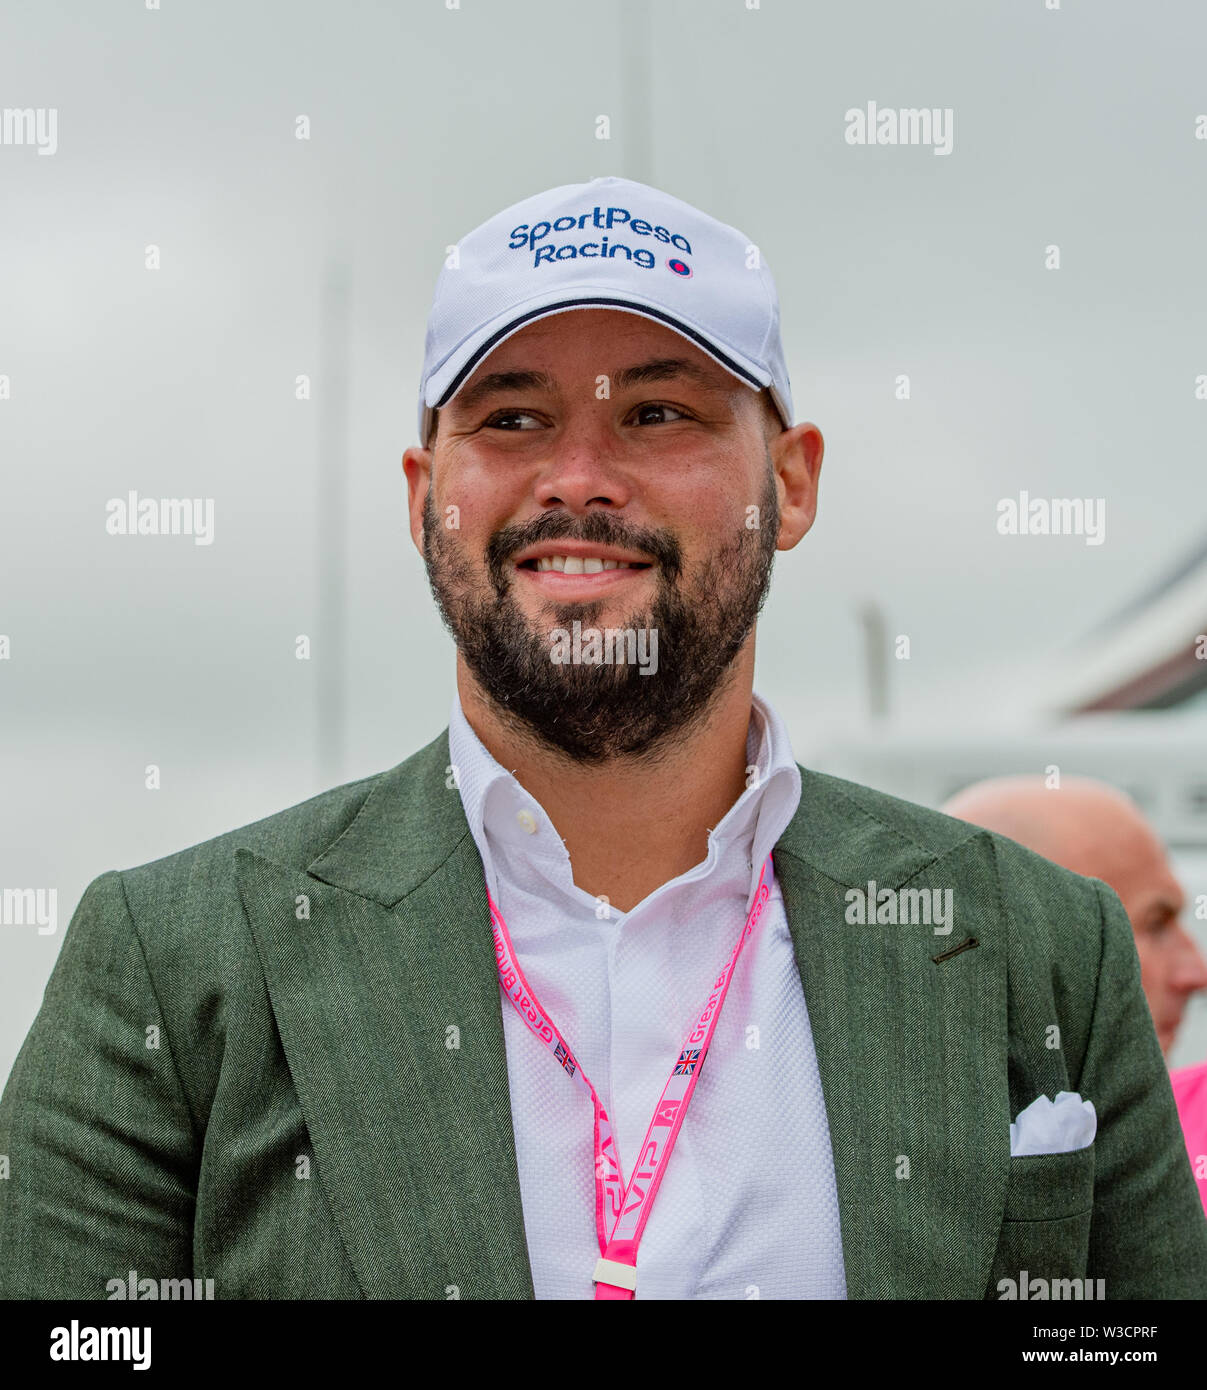 Towcester, United Kingdom. 14th July, 2019. Tony Bellew - Former professional boxer and commentator attended today's Race Day during Formula 1 Rolex British Grand Prix 2019 at Silverstone Circuit on Sunday, July 14, 2019 in Towcester, ENGLAND. Credit: Taka G Wu/Alamy Live News Stock Photo